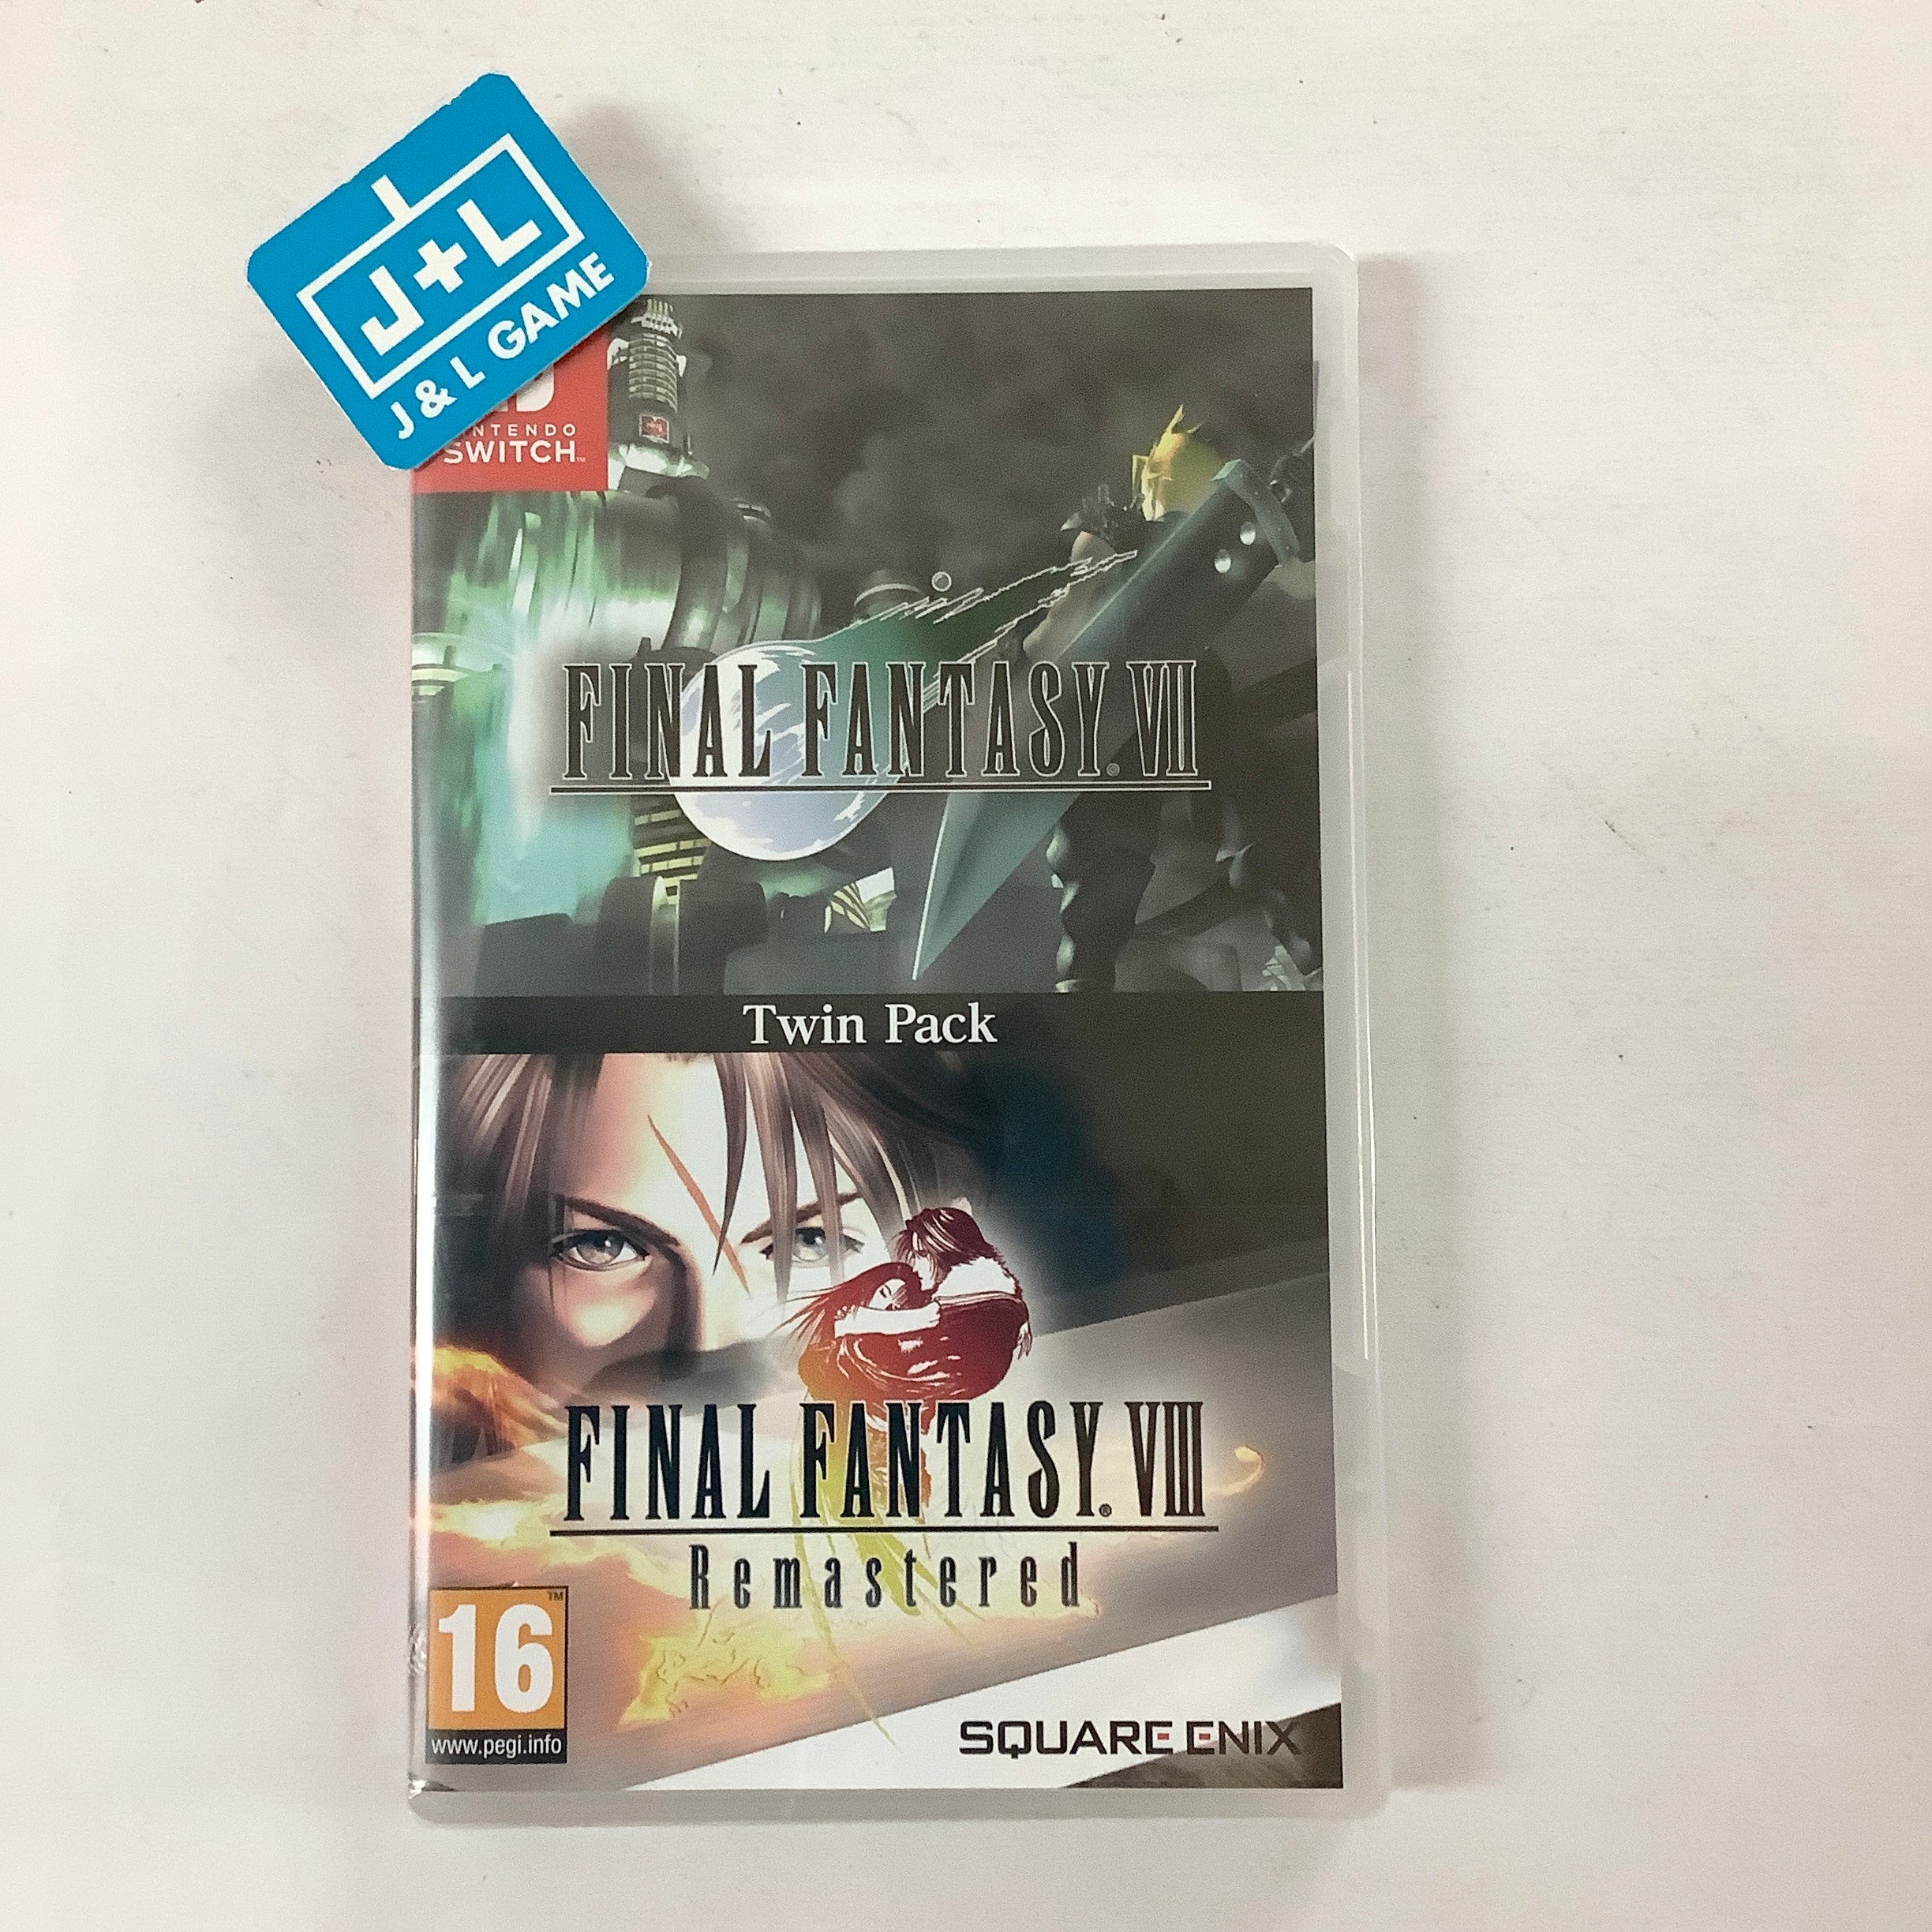 Final Fantasy VII & Final Fantasy VIII Remastered Twin Pack - (NSW) Nintendo Switch (European Import) Video Games Square Enix   